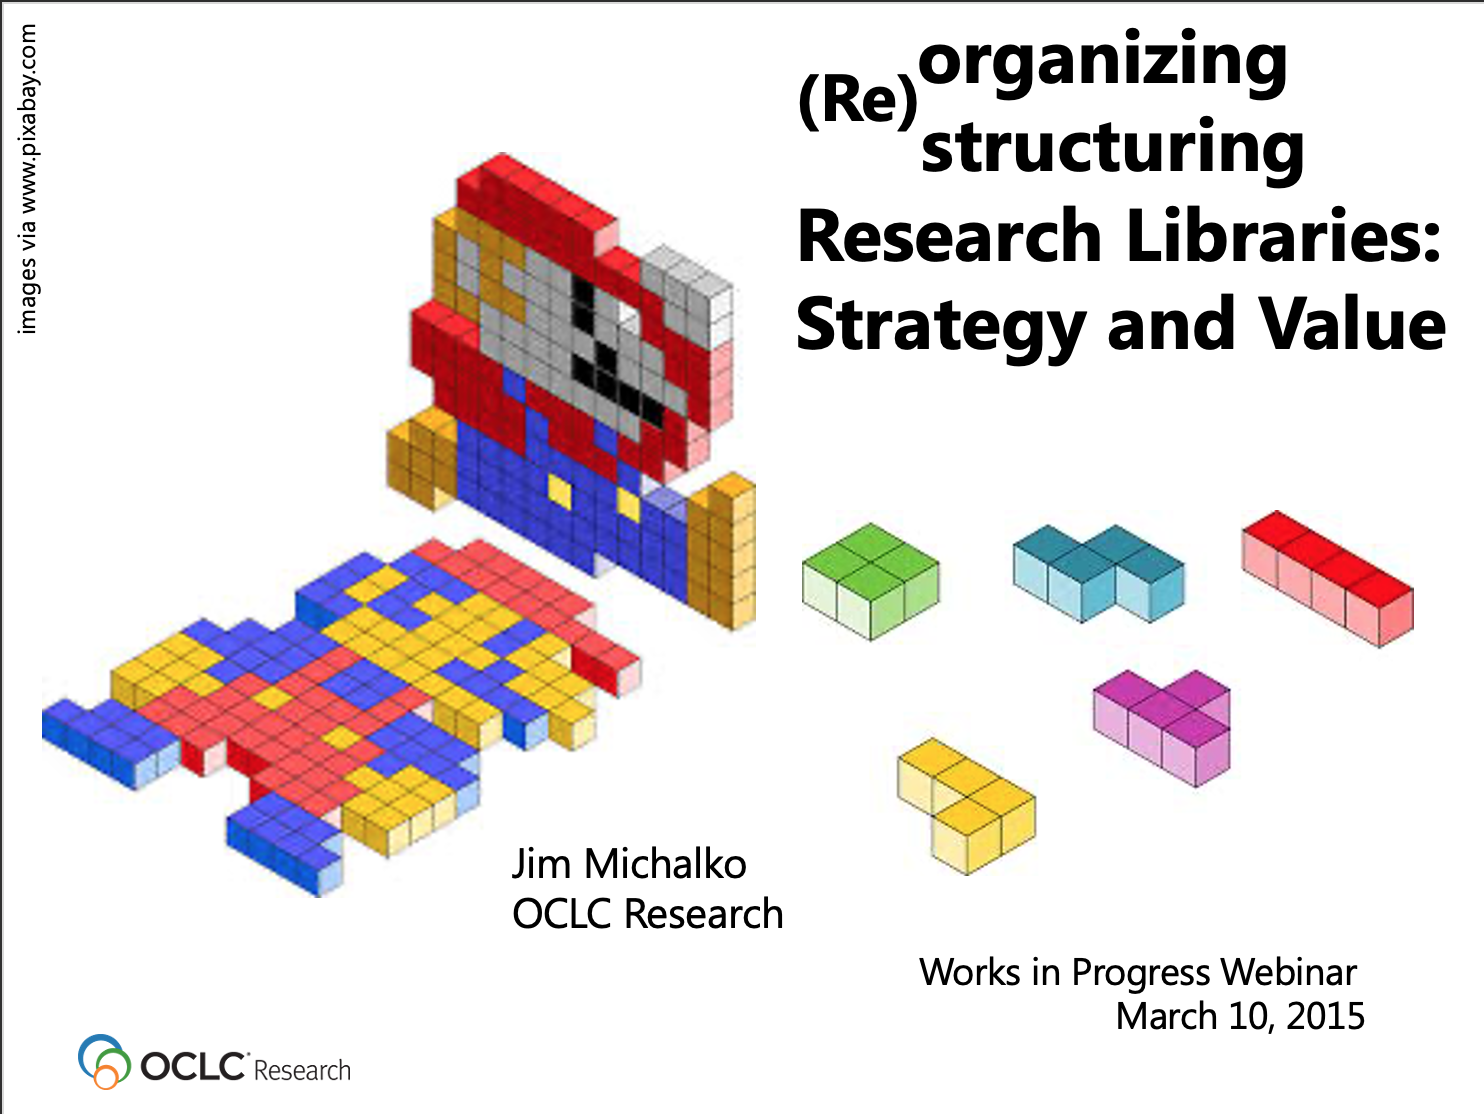 Reorganizing and Restructuring the Research Library for Strategy and Value